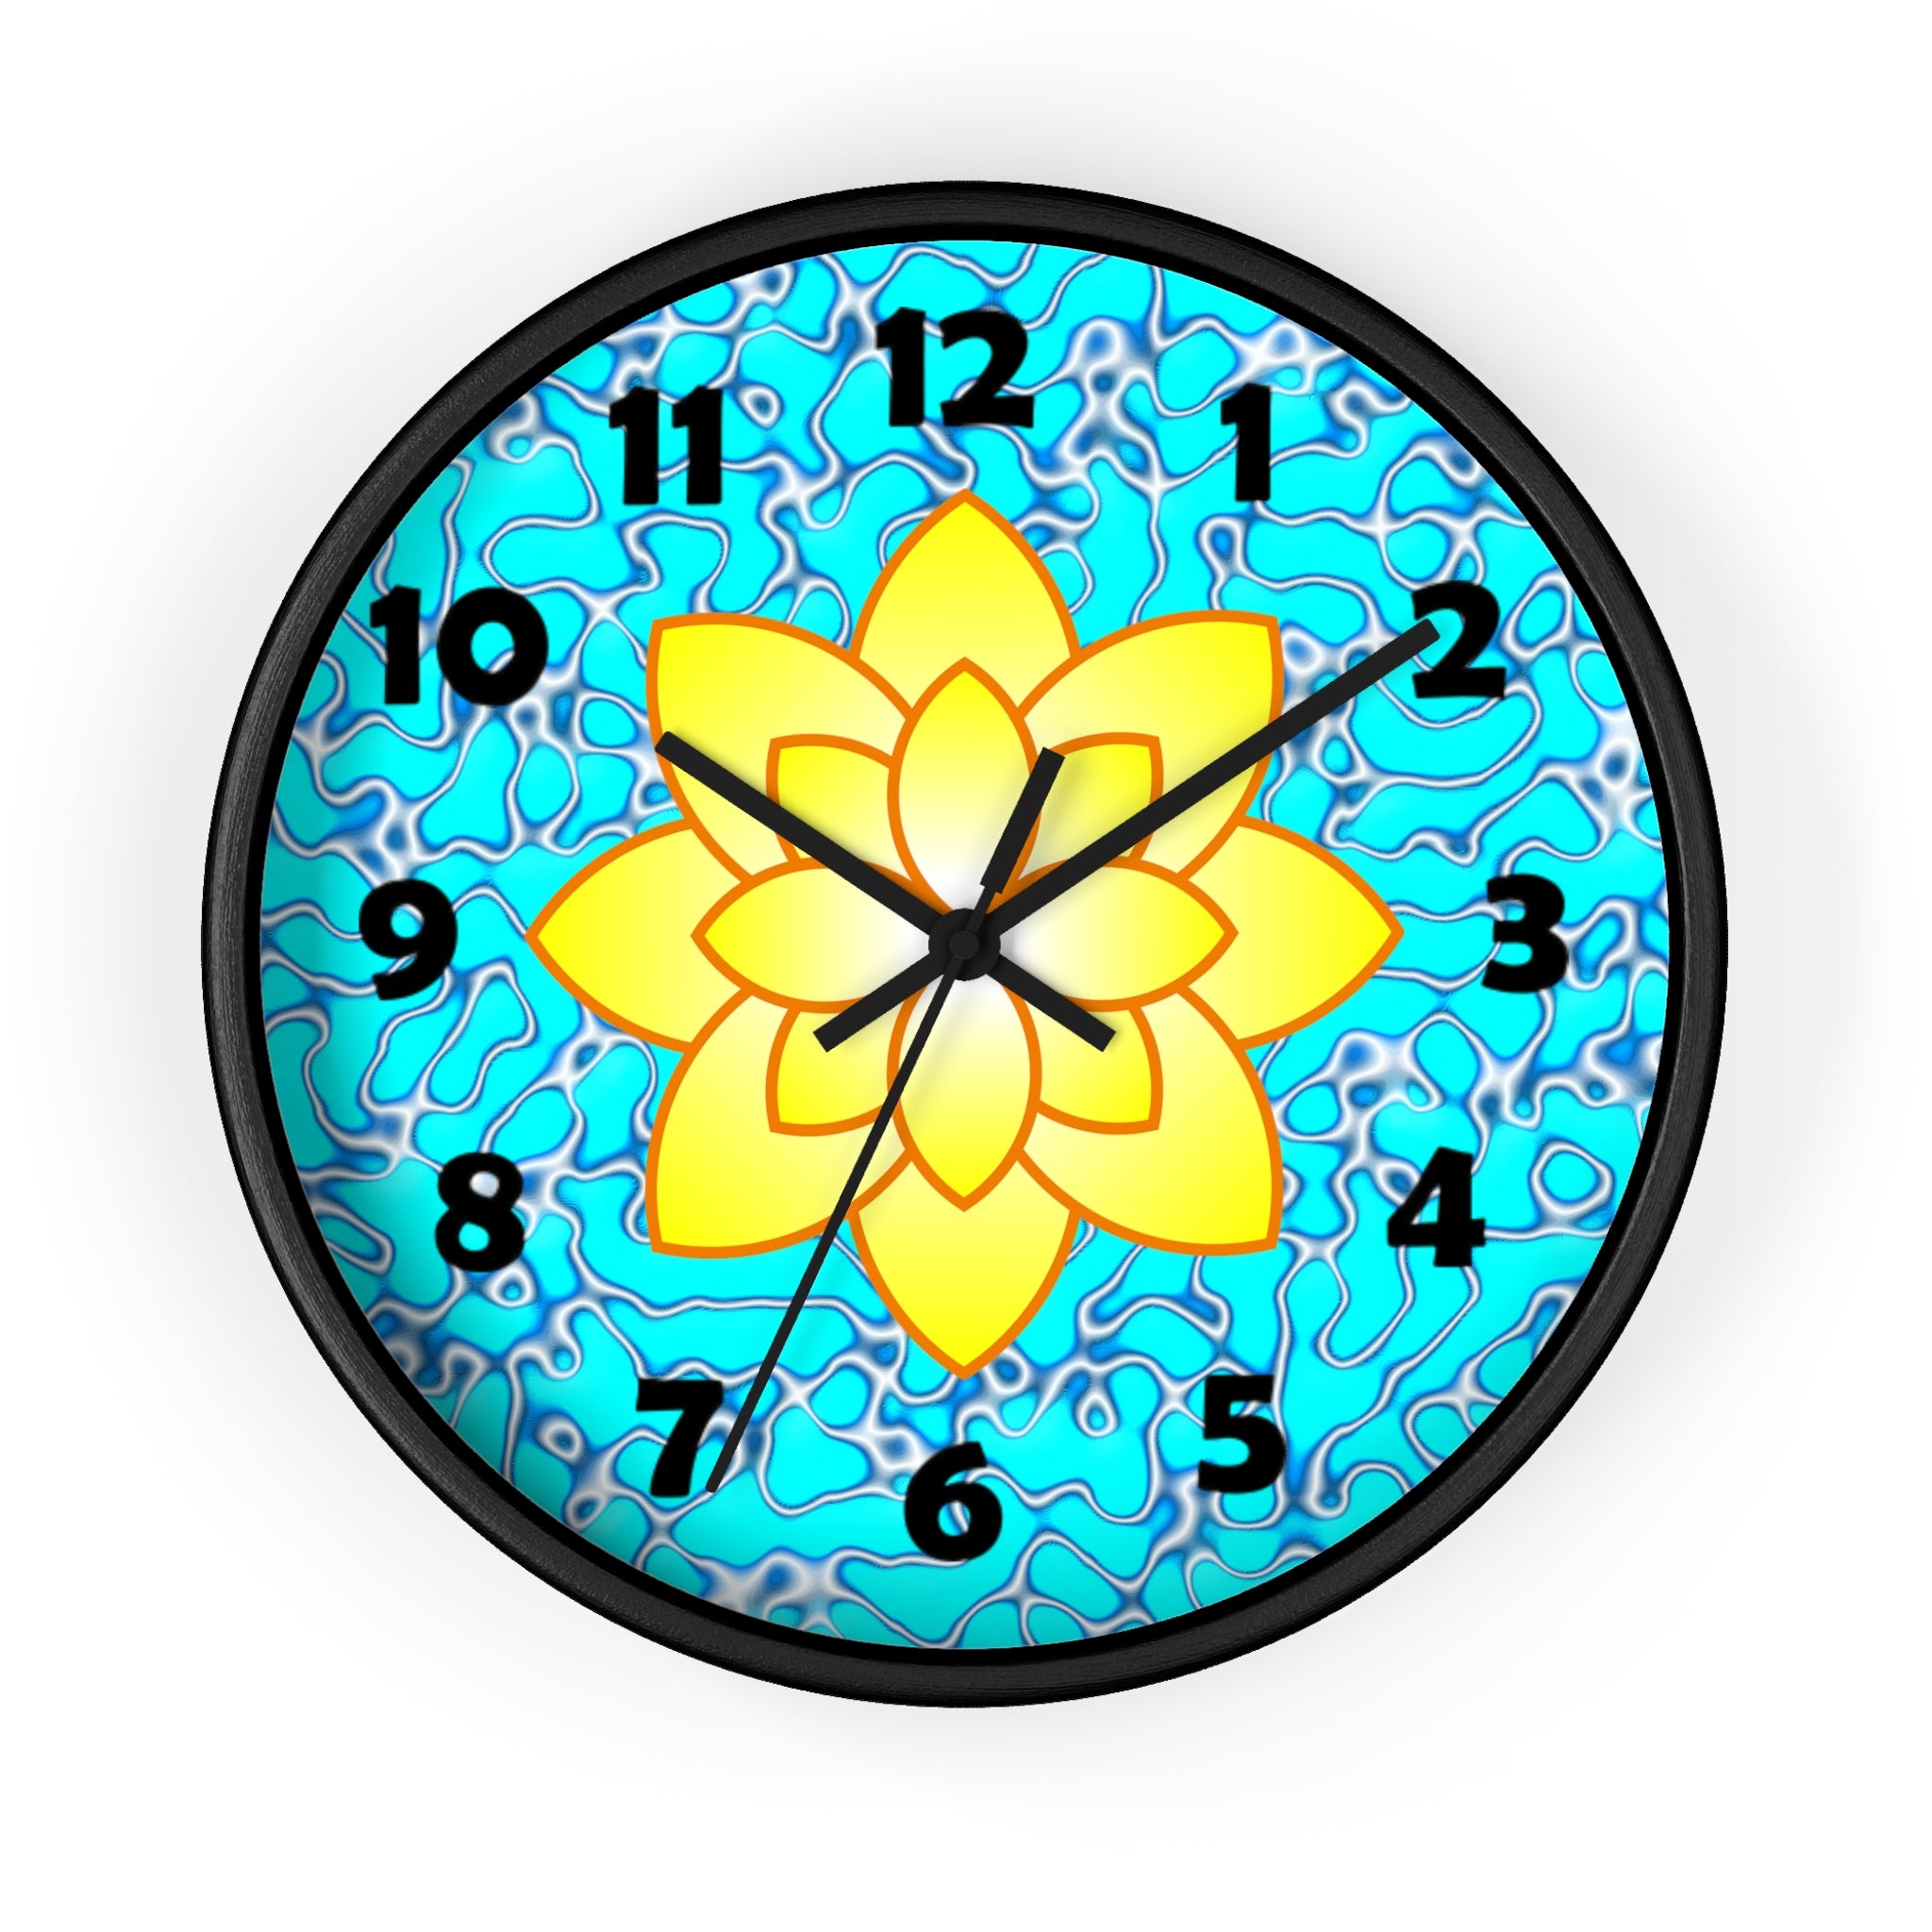 10 inch round wall clock with a yellow lily on a blue marble background